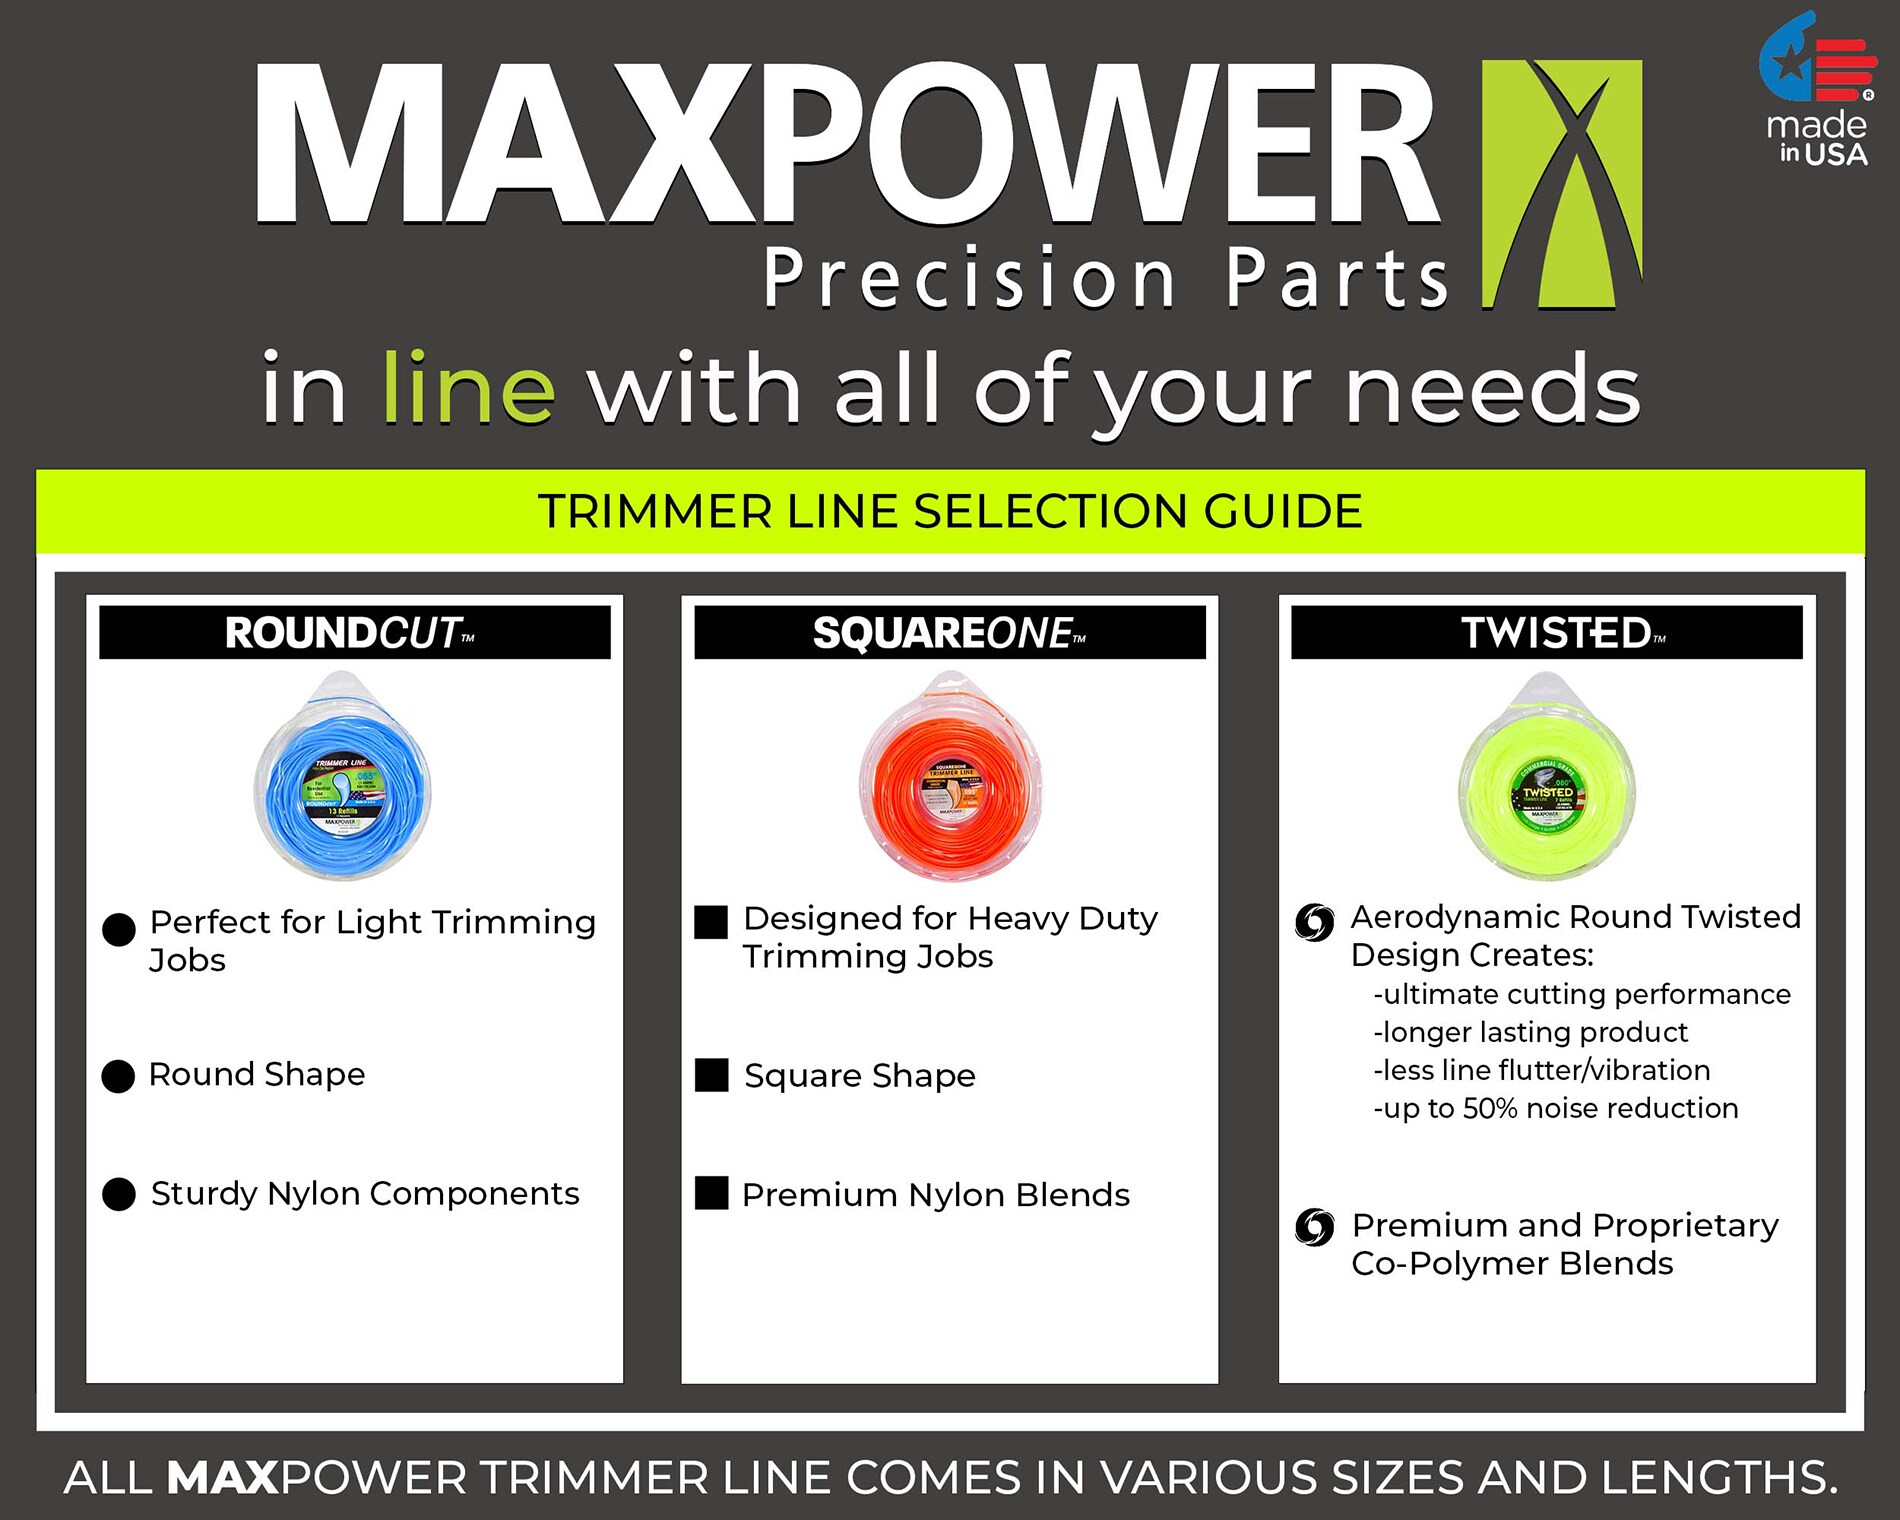 Maxpower 338801 Premium Twisted Trimmer Line .080-Inch Twisted Trimmer Line 40-Foot Length